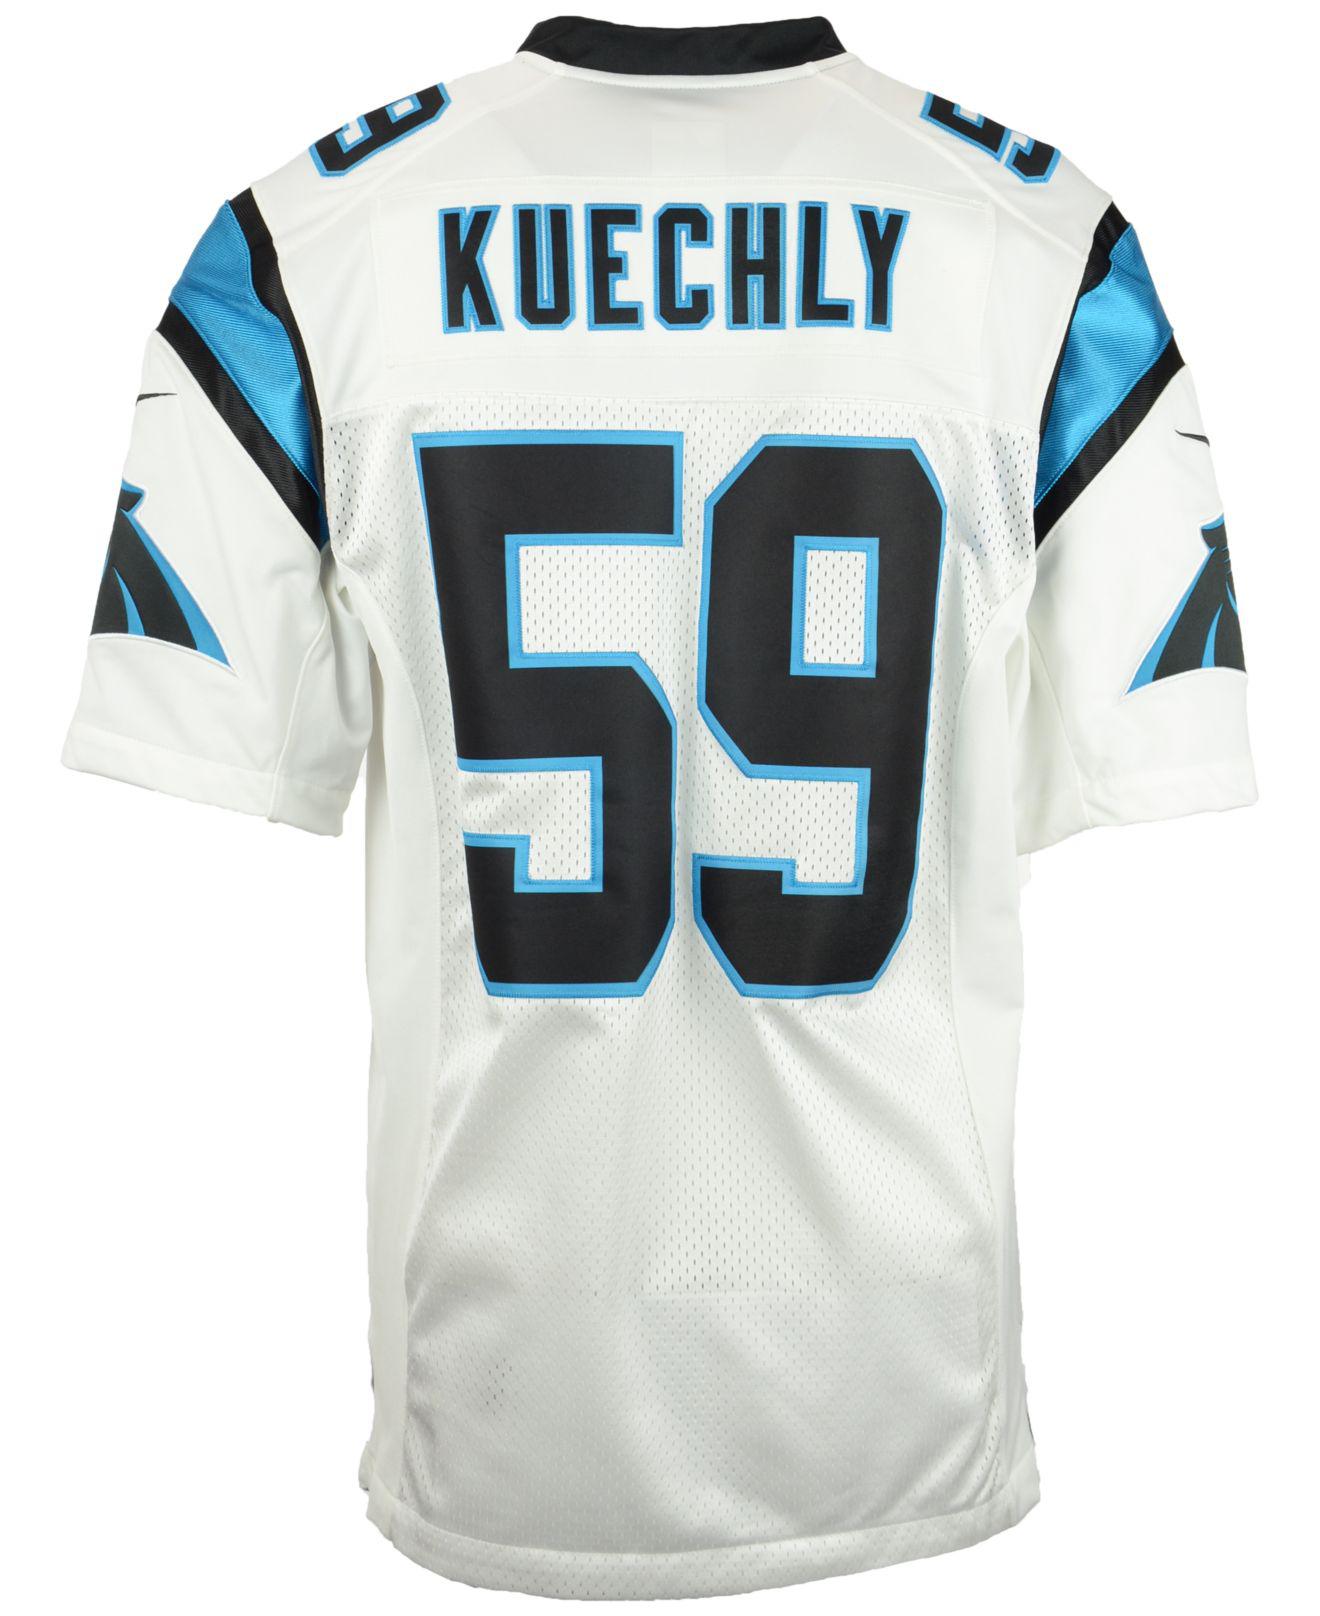 panthers limited jersey